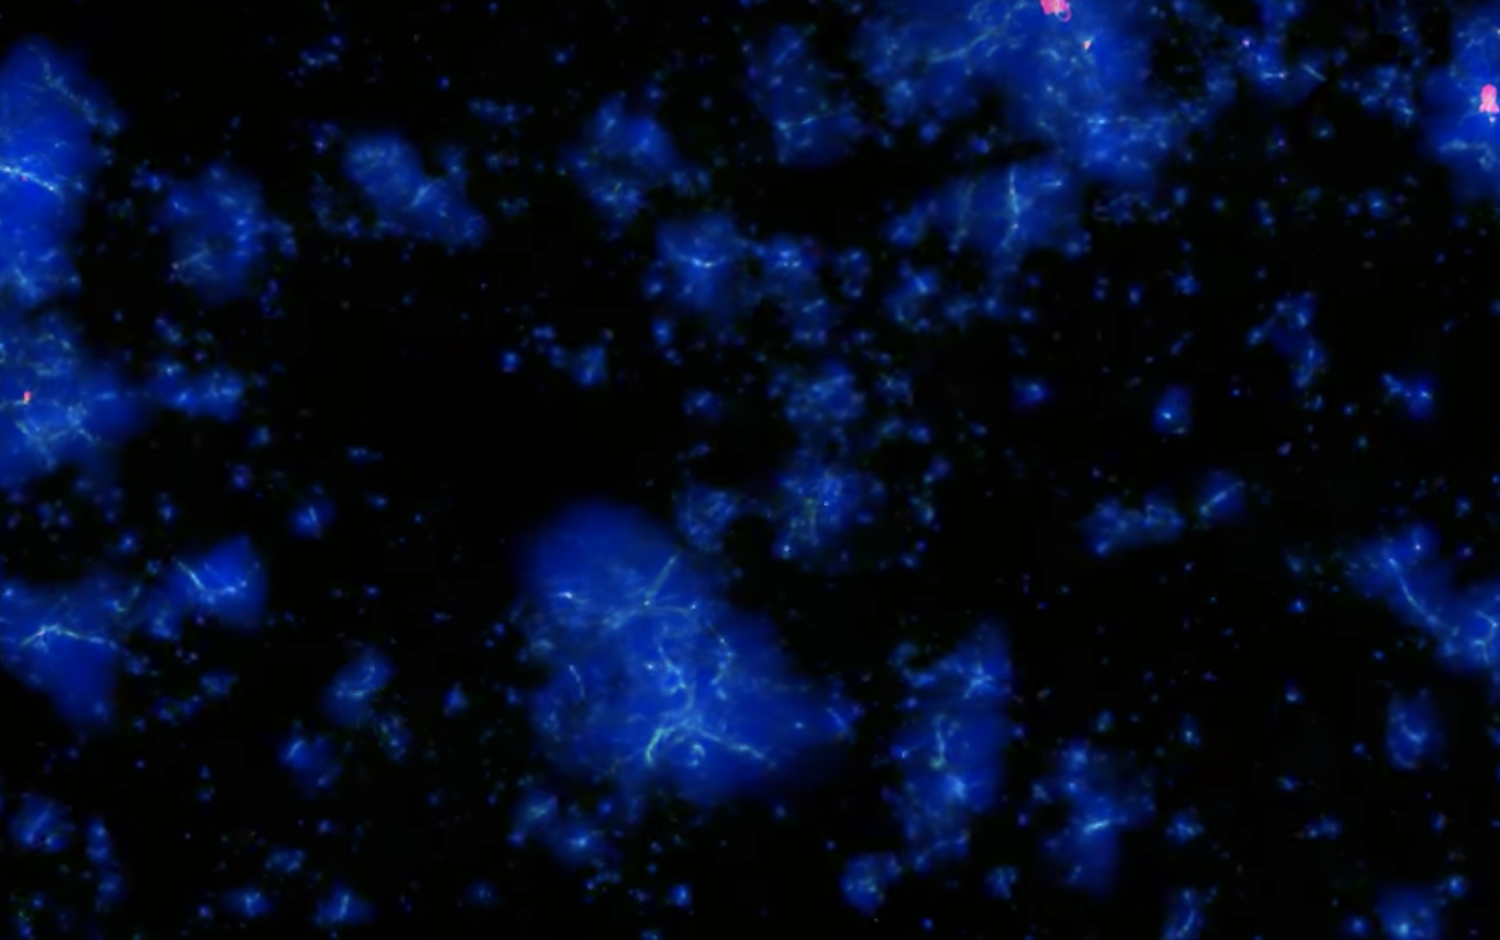 This movie shows a 16/h co-moving Mega-parsec sub-region of the Cosmic Dawn III simulation. Ionising photon density is shown in blue, gas density is in white, high temperature regions appear in red. <a href='https://drive.google.com/file/d/1cknDGp9JHXLgtVrVe6lU5e56hZWzr974/view?usp=sharing' target='_blank'>Download (257MB)</a>